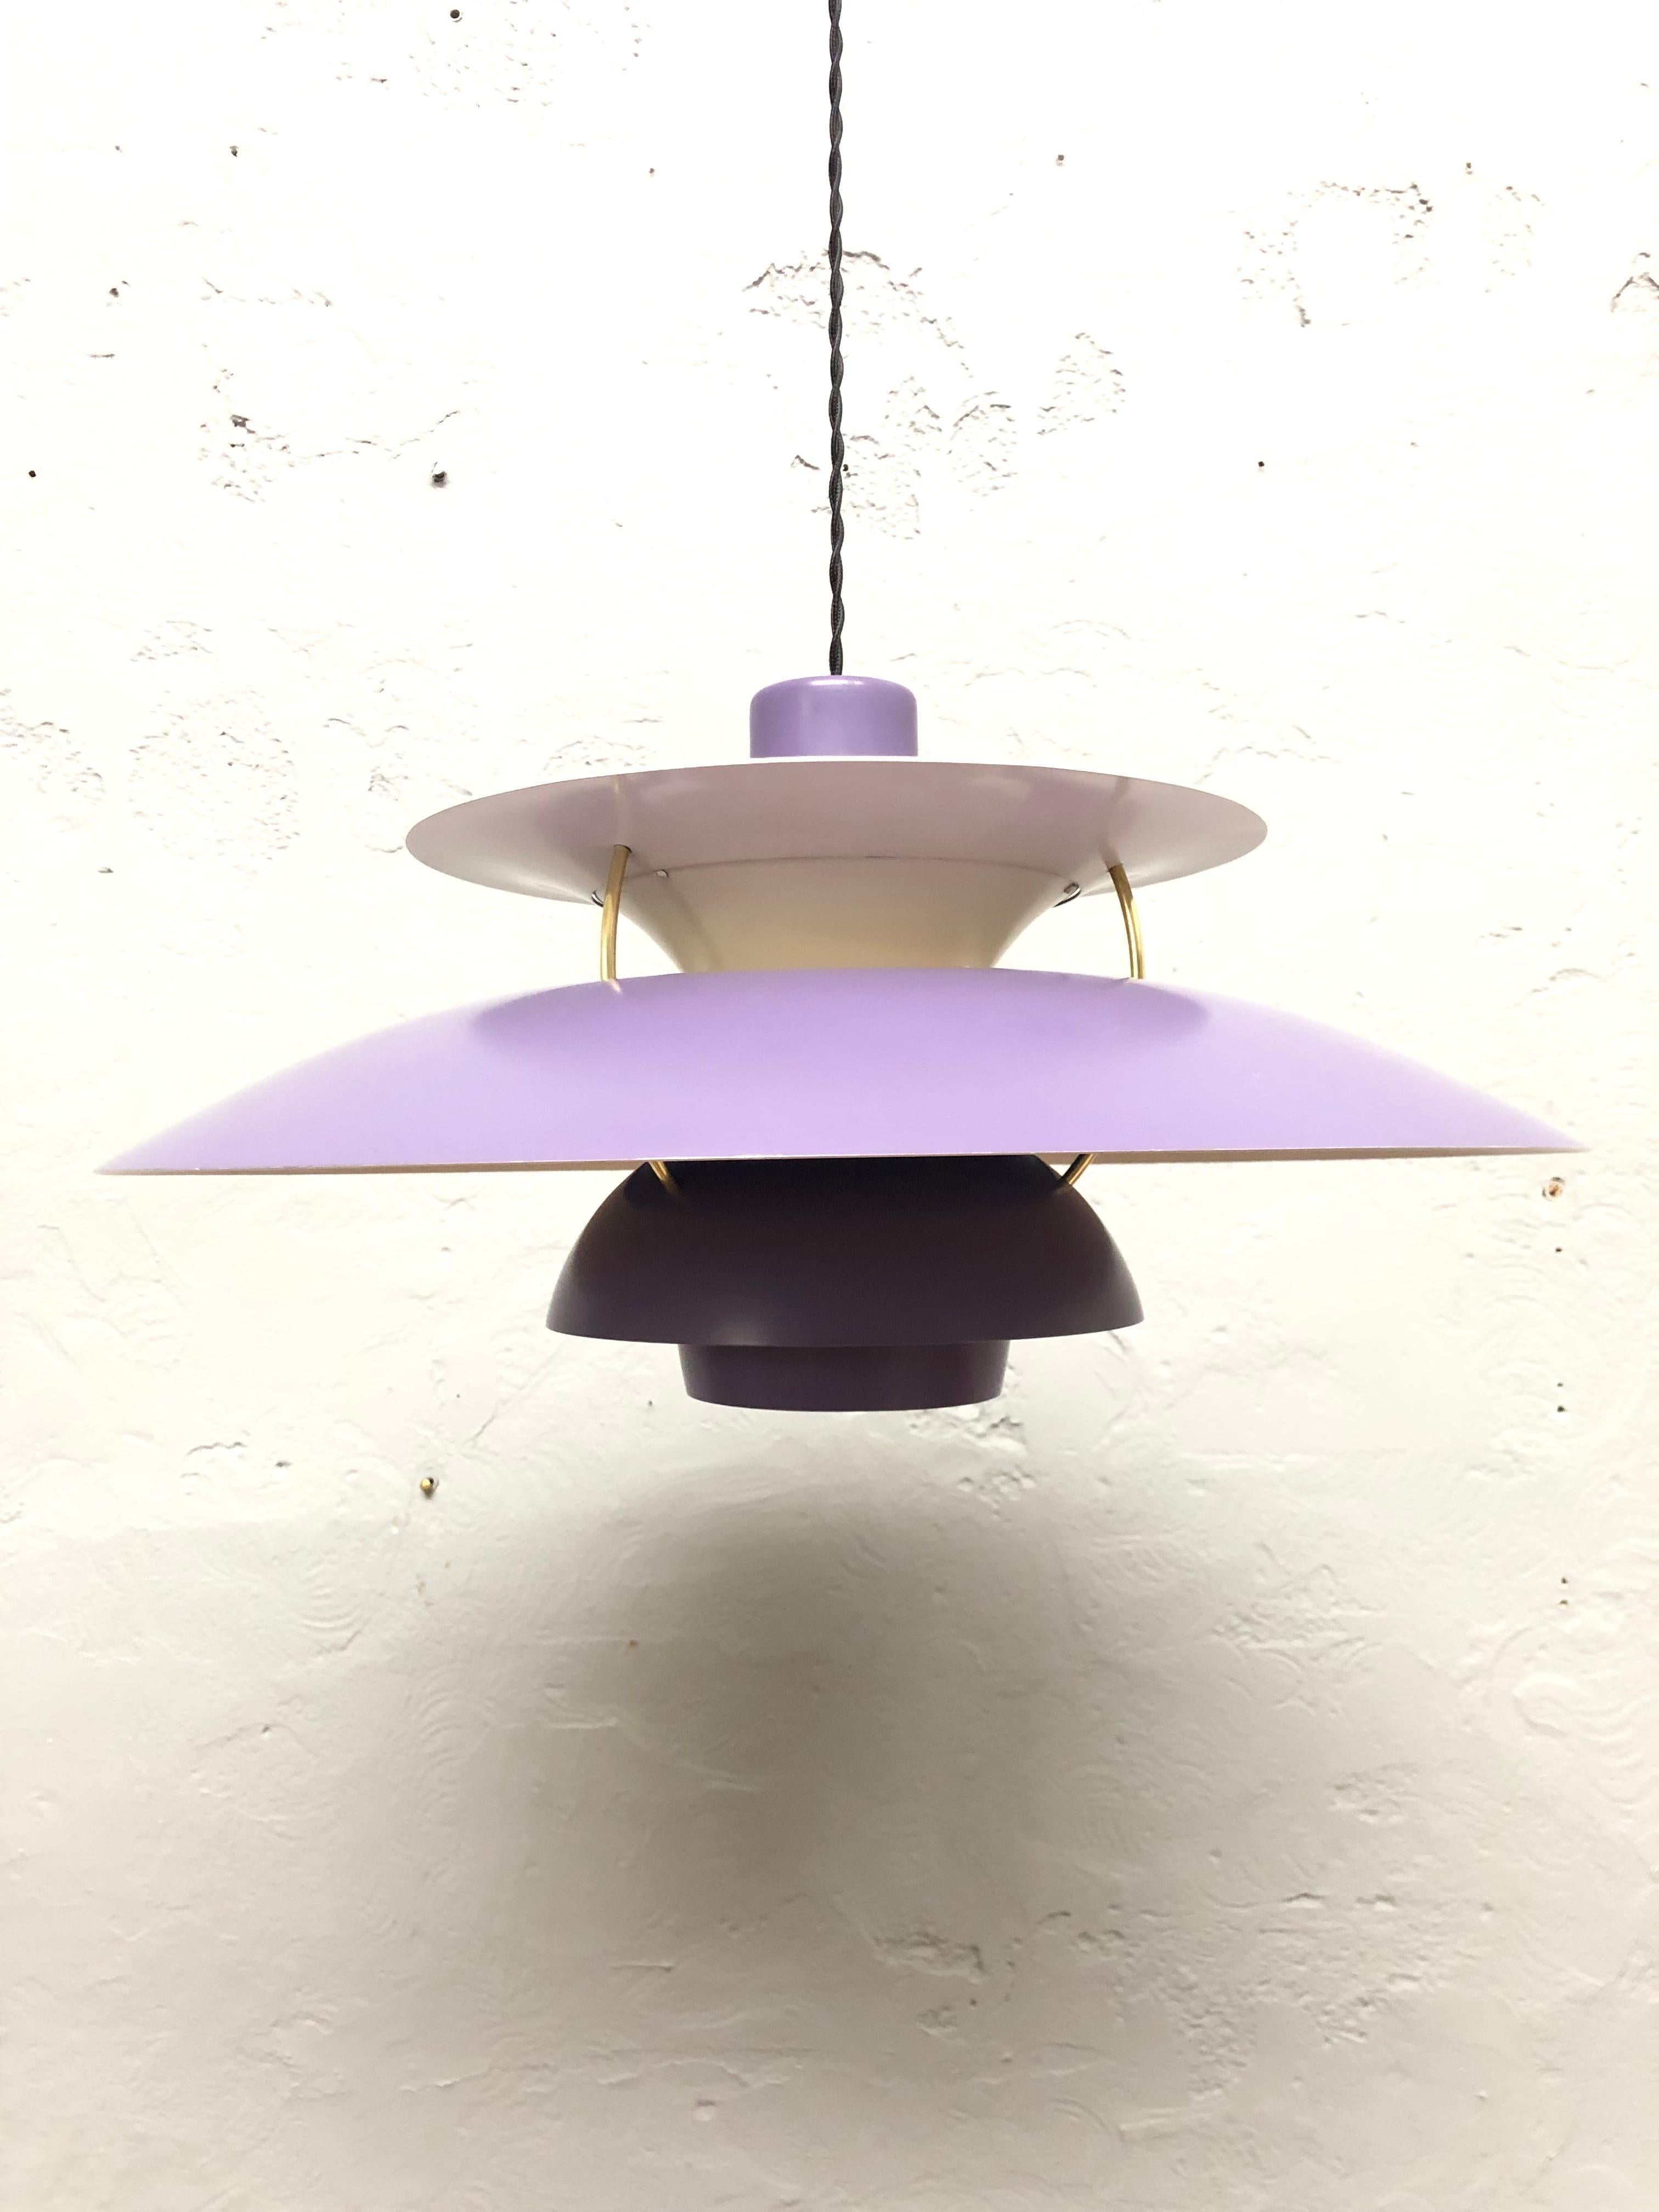 Iconic rare 1st edition vintage PH 5 chandelier pendant lamp from 1958 in purple ( series 1 )
Purple was a very popular mid century color in Scandinavia. It was also the first color PH5 was produced in.
And it is also a retro color that is making a